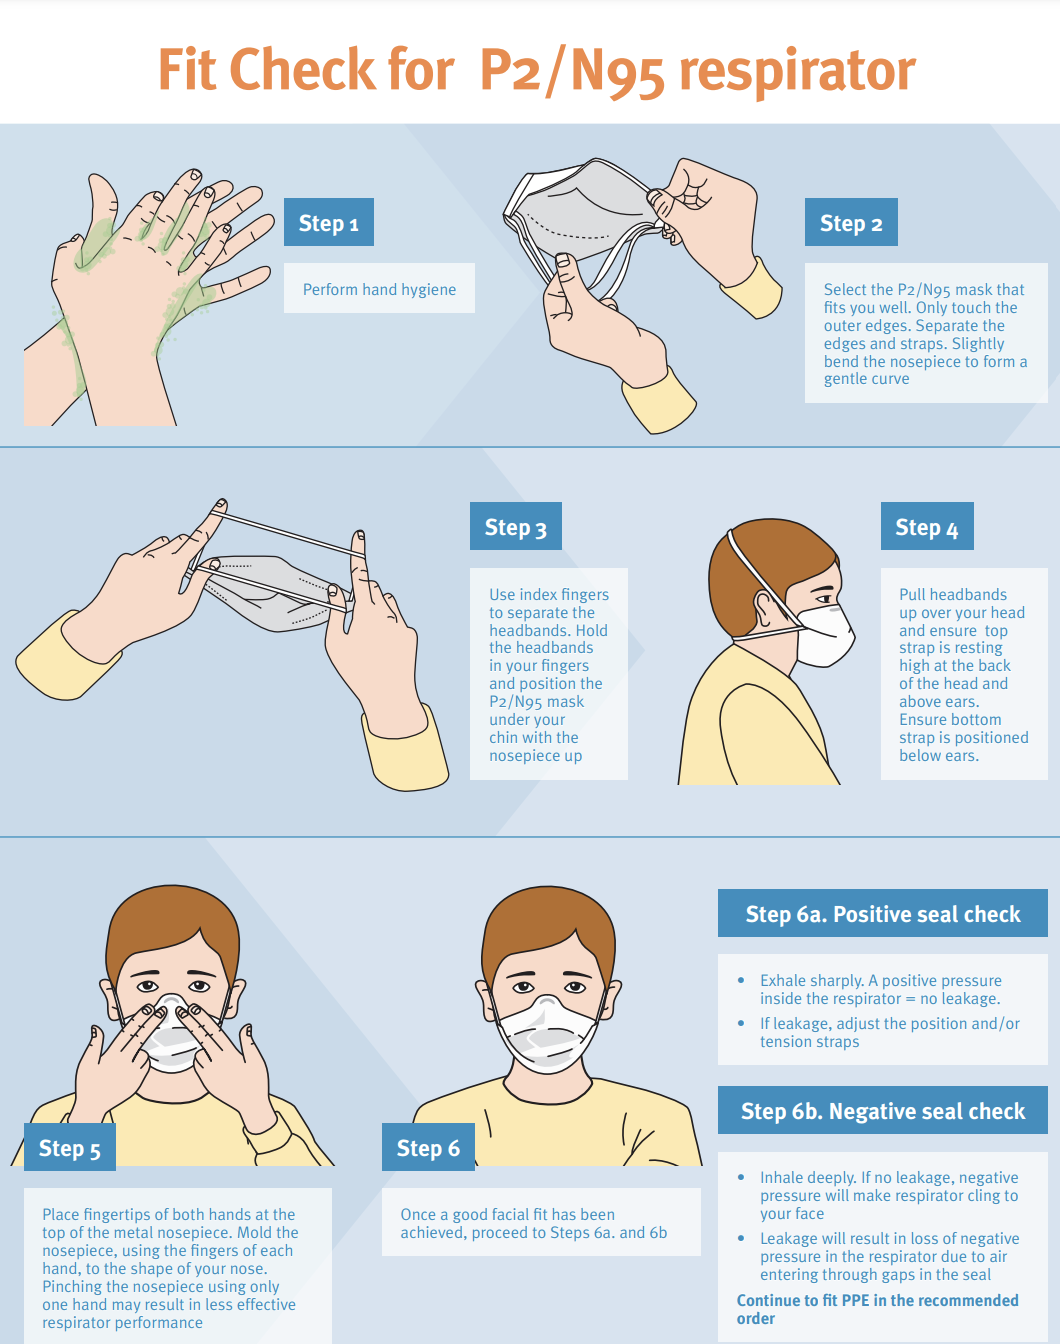 Image with a light blue background showing the steps for fit checking a respirator. Step 1: Perform hand hygiene Step 2: Select the P2/N95 mask that fits you well. Only touch the outer edges. Separate the edges and straps. Slightly bend the nosepiece to form a gentle curve. Step 3: Use index fingers to separate the headbands. Hold the headbands in your fingers and position the P2/N95 mask under your chin with the nosepiece up. Step 4: Pull headbands up over your head and ensure top strap is resting high at the back of the head and above ears. Ensure bottom strap is positioned below ears. Step 5: Place fingertips of both hands at the top of the metal nosepiece, using the fingers of each hand, to the shape of your nose. Pinching the nosepiece using only one hand may result in less effective respirator performance. Step 6: Once a good facial fit has been achieved, proceed to Steps 6a and 6b Step 6a. Positive seal check: Exhale sharply. A positive pressure inside the respirator equals no leakage. If leakage, adjust the position and/or tension straps. Step 6b. Negative seal check: Inhale deeply. If no leakage, negative pressure will make respirator cling to your face. Leakage will result in loss of negative pressure in the respirator due to air entering through gaps in the seal. Continue to fit PPE in the recommended order.